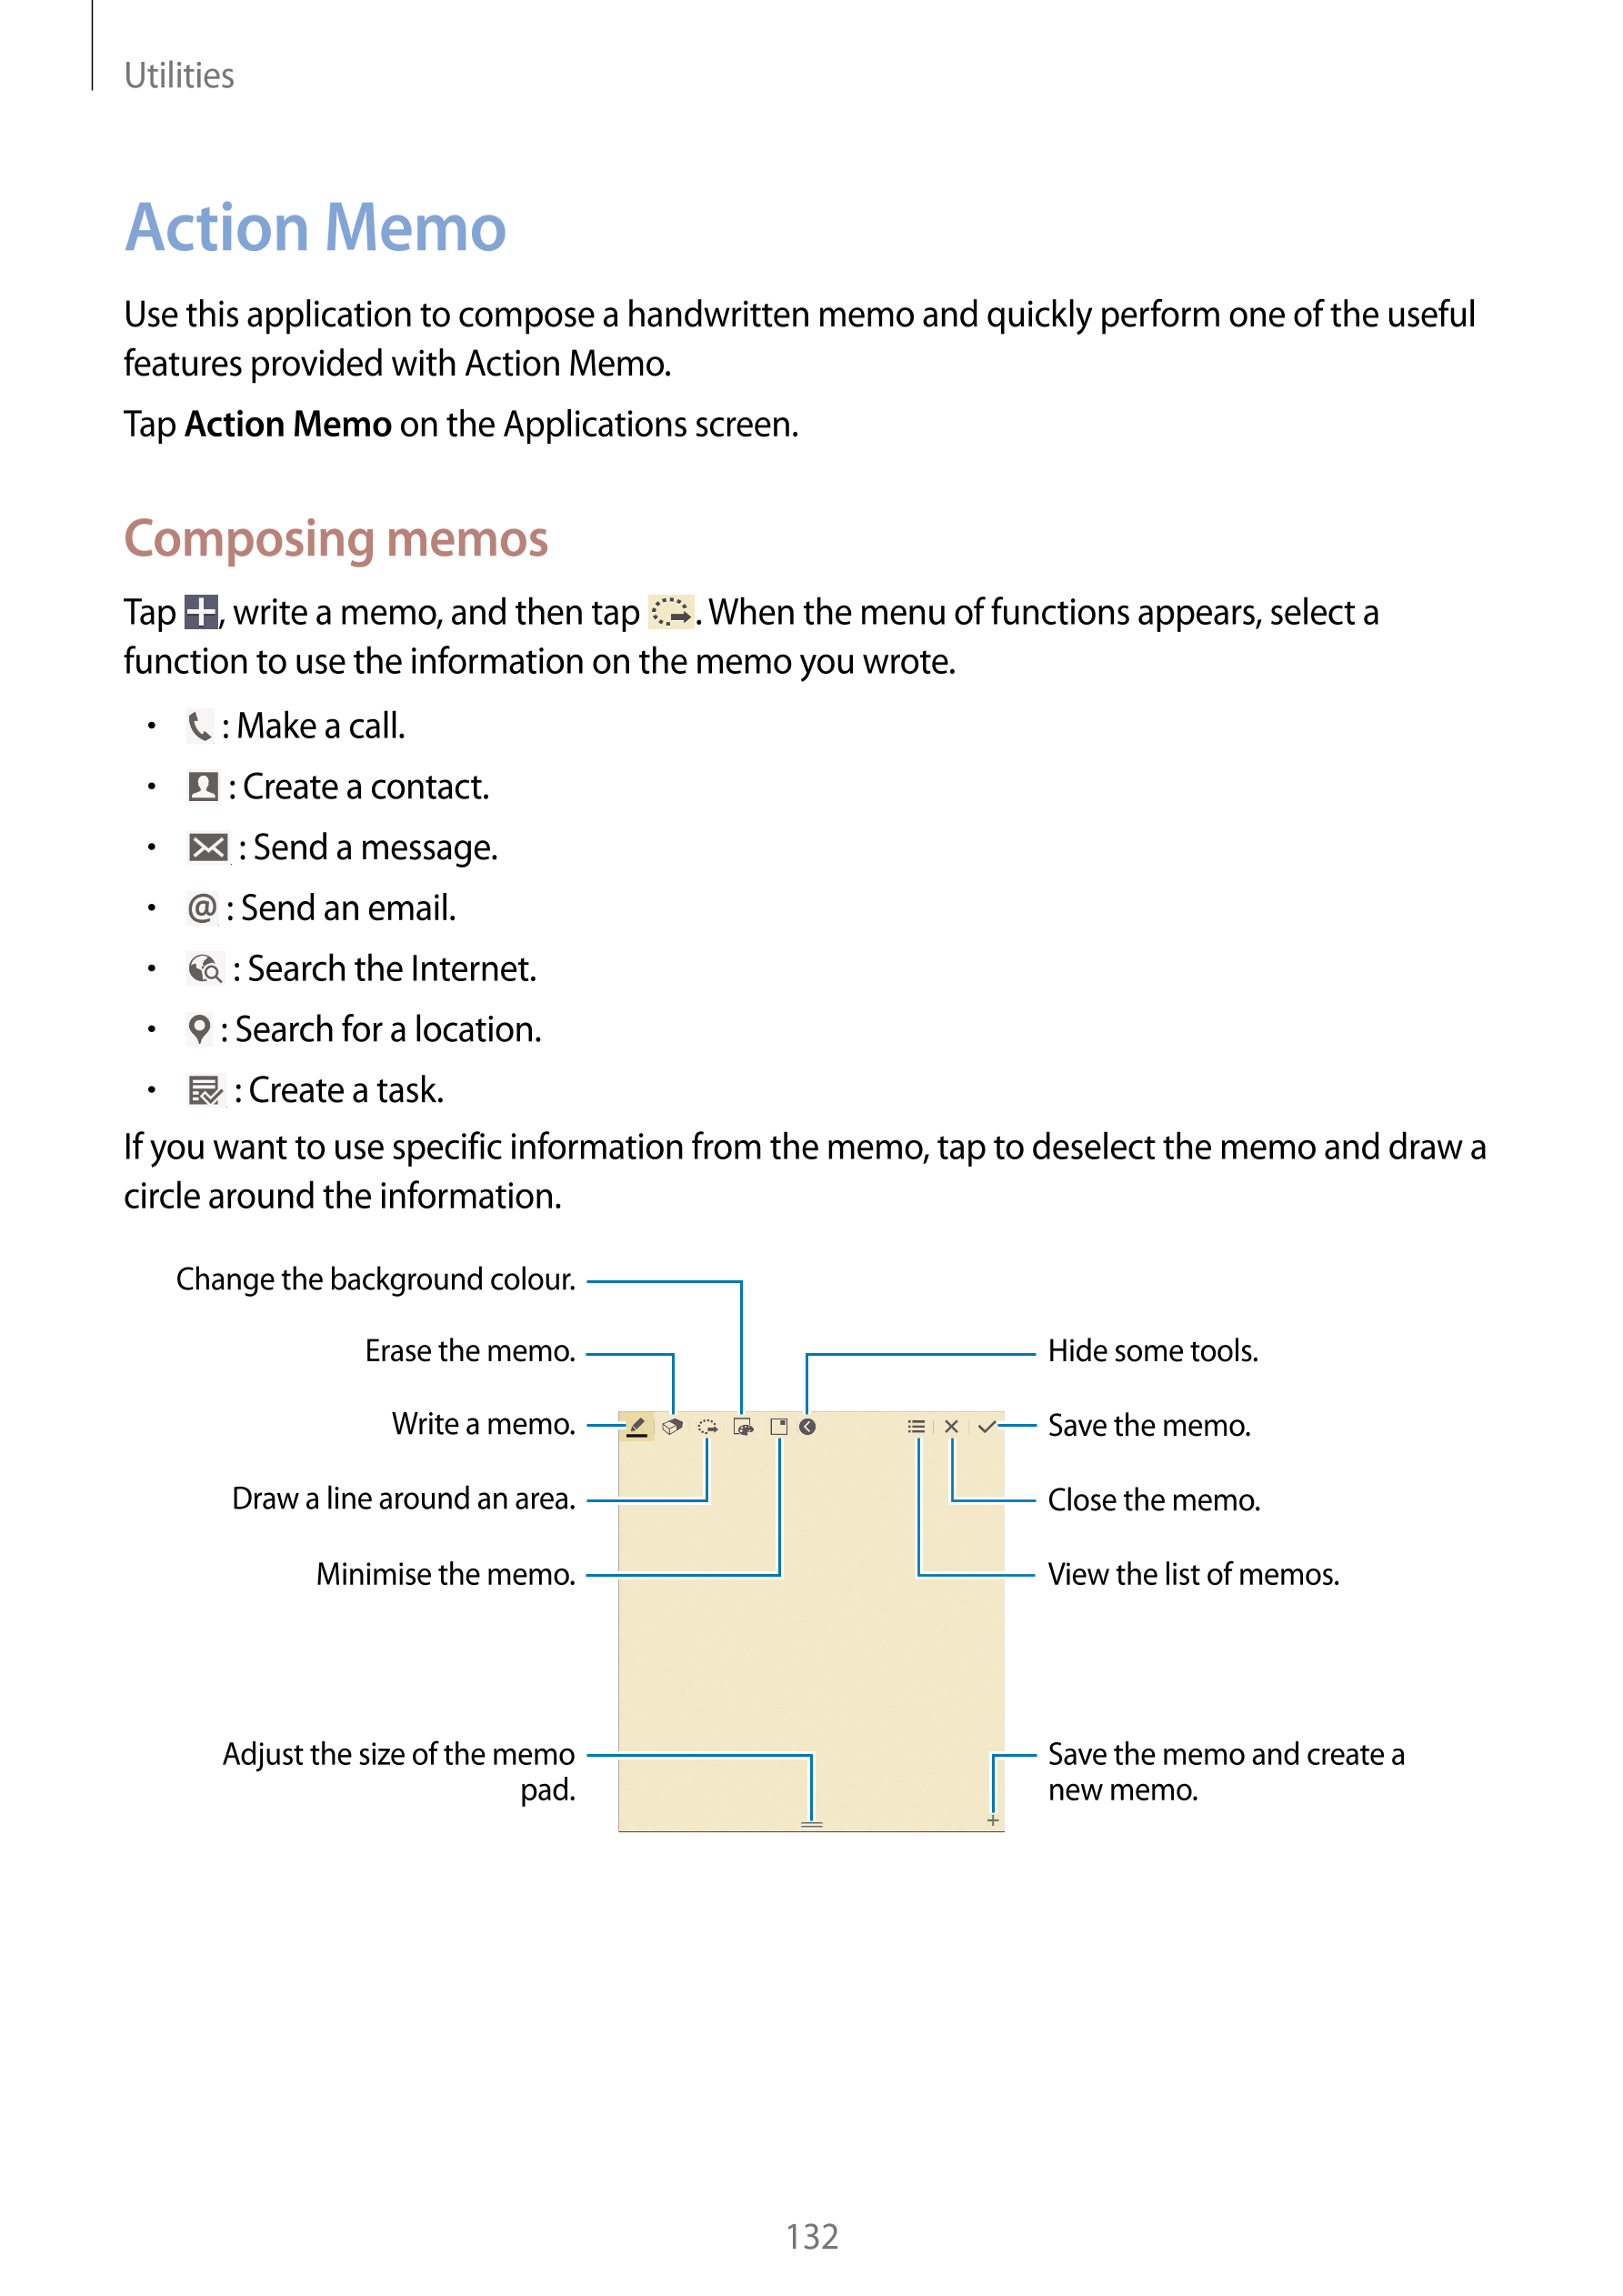 Utilities
Action Memo
Use this application to compose a handwritten memo and quickly perform one of the useful 
features provide